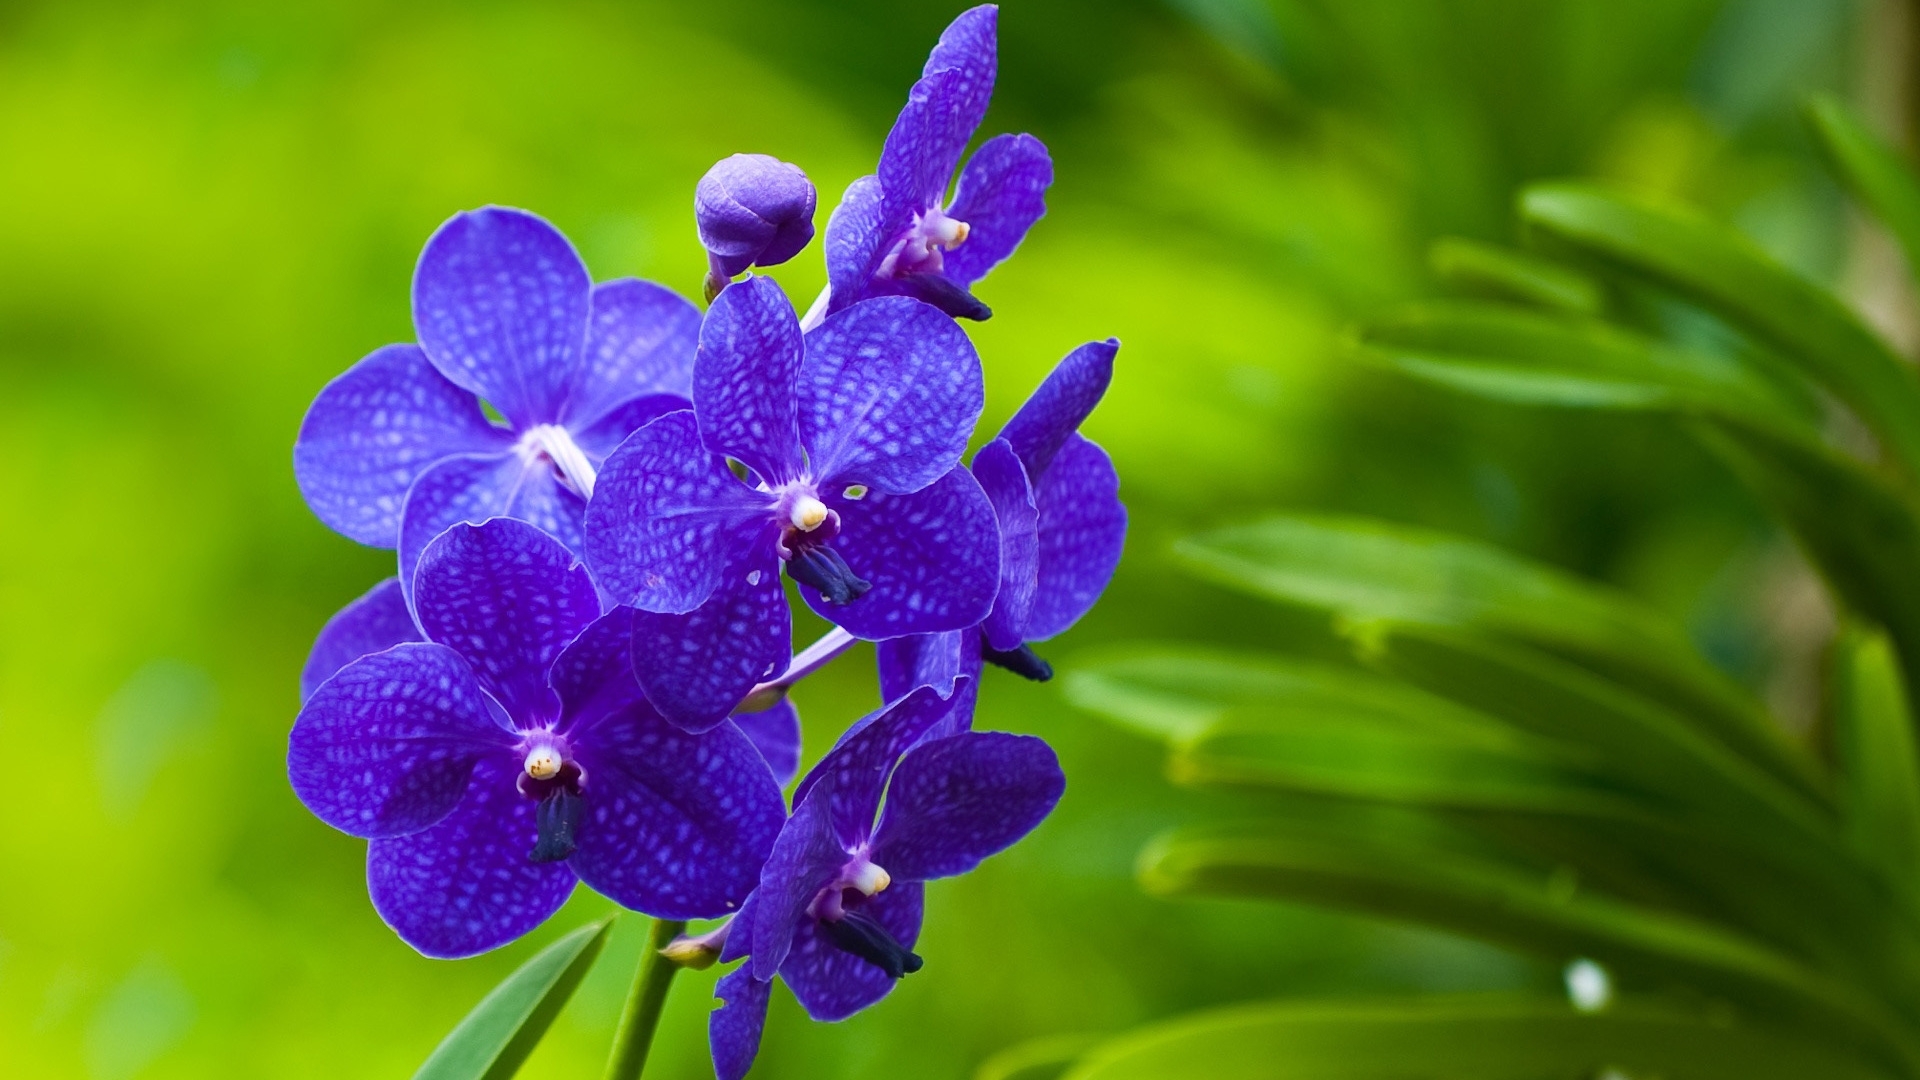 Cool Wallpapers plants, flowers, violet, green